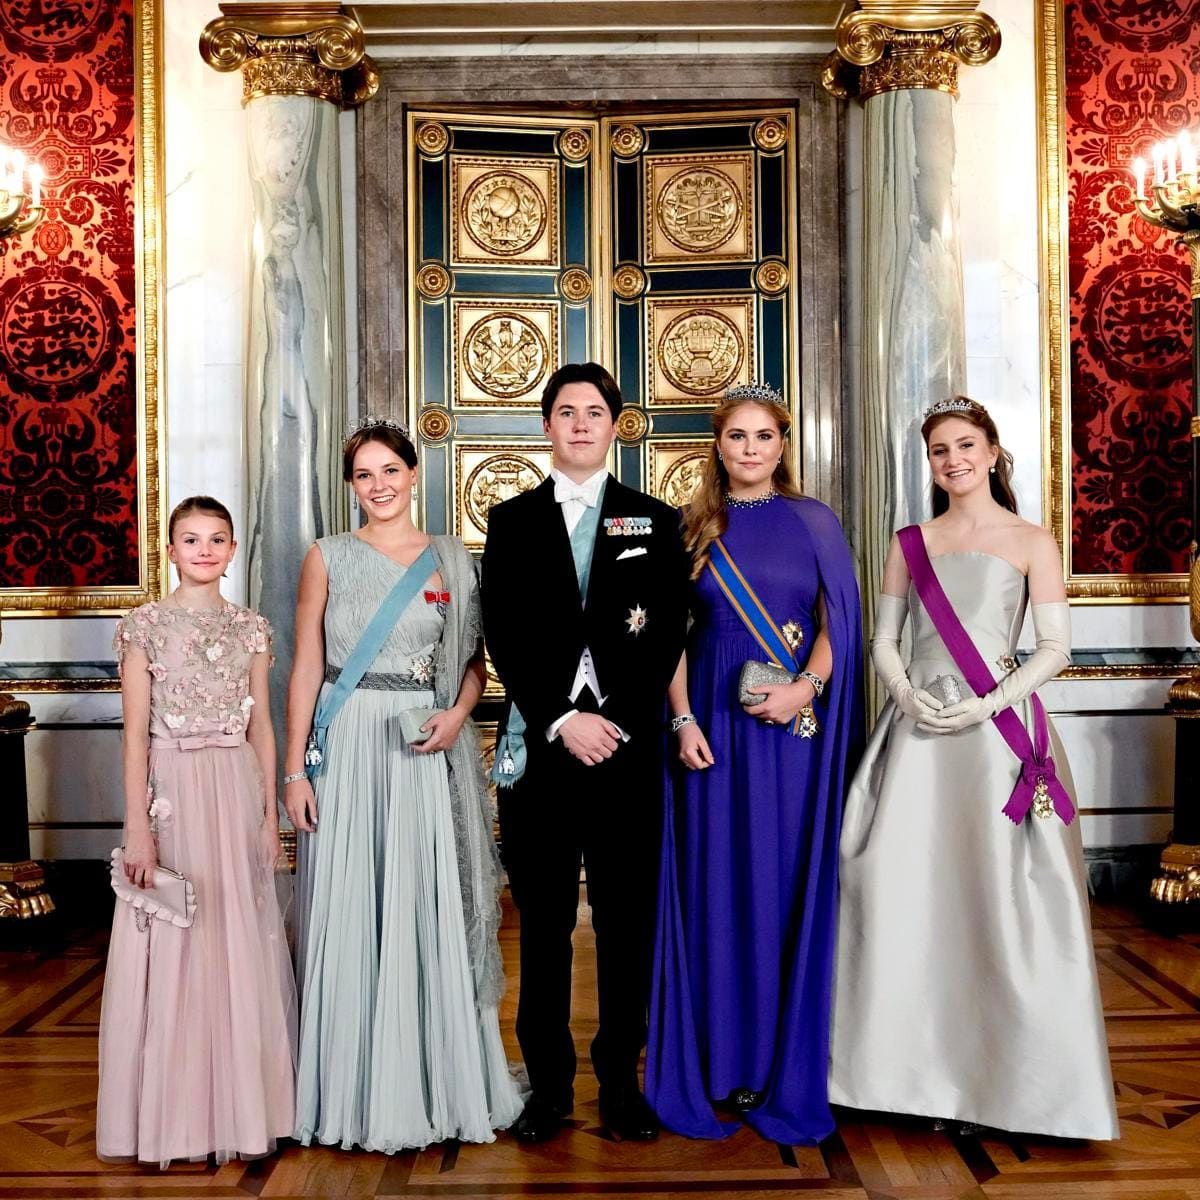 The young heirs posed for a group portrait in the Flylsgemakket of Christiansborg Palace on Oct. 15. Alongside the image, the Danish Royal House wrote, " Five of Europe's future monarchs have gathered for His Royal Highness Prince Christian's 18th birthday."